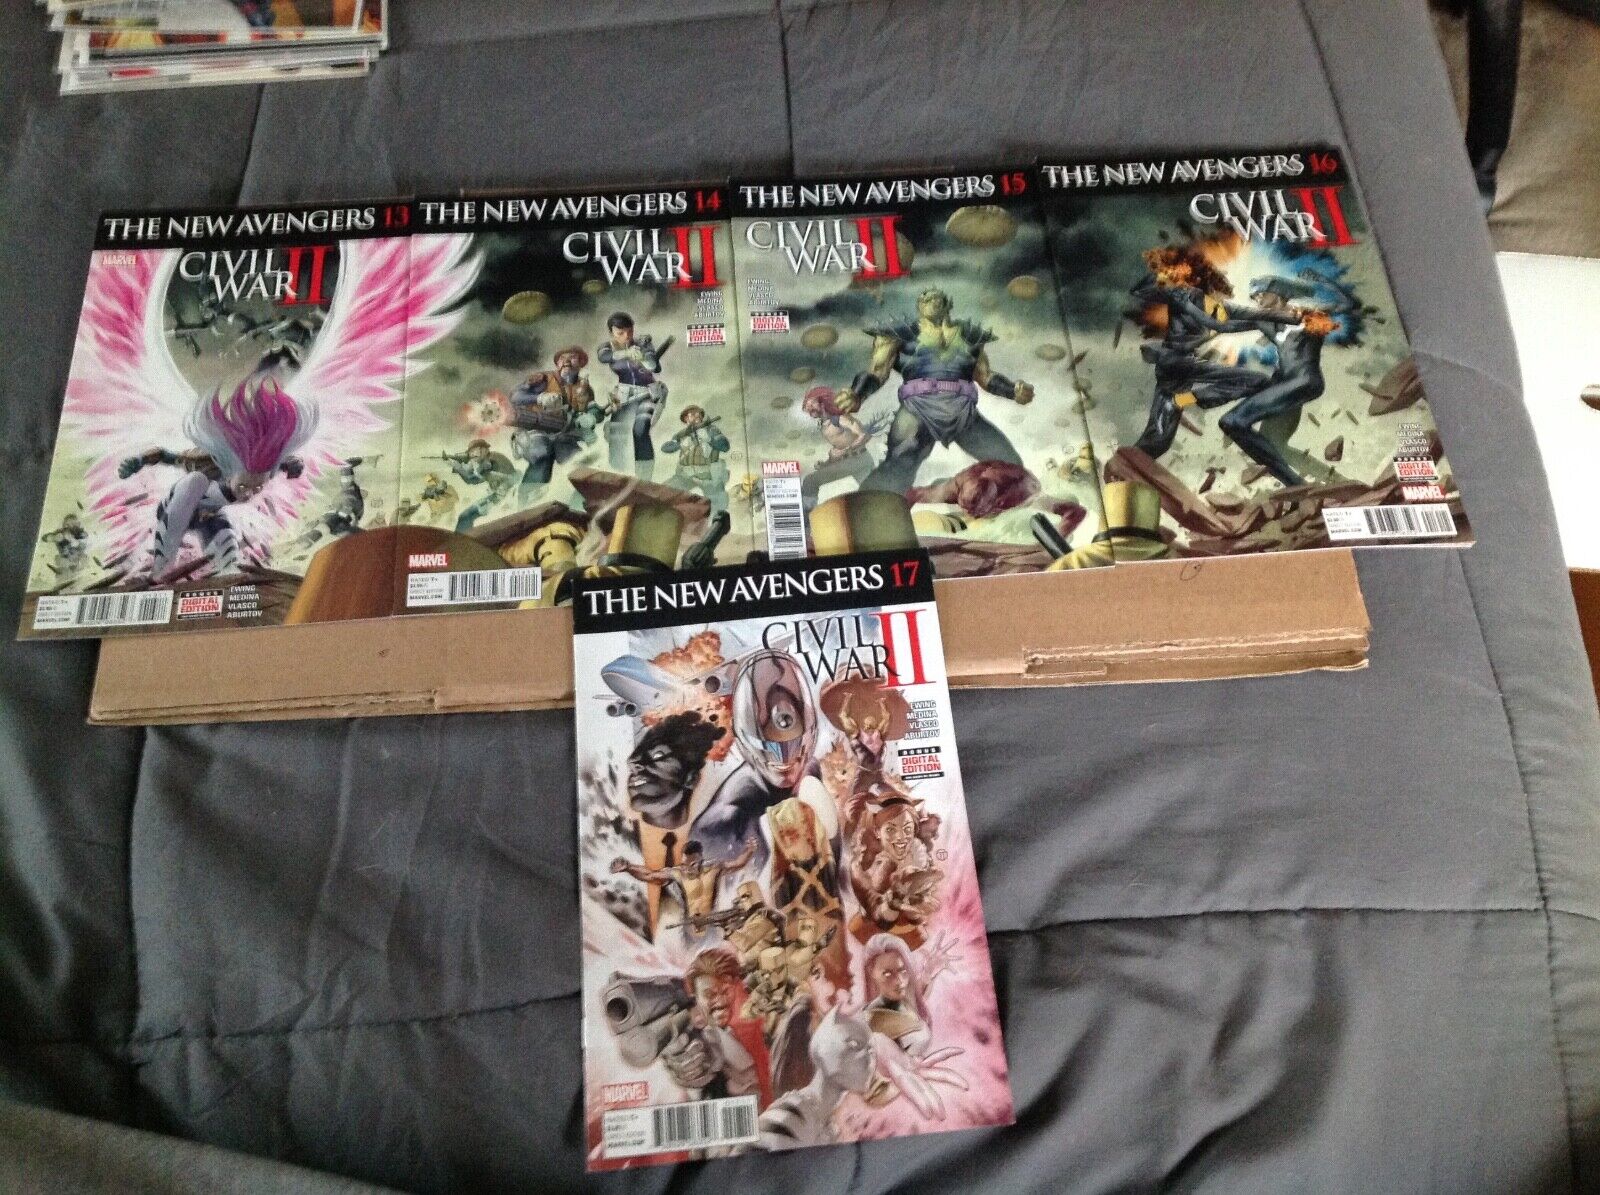 New Avengers Civil War II 13-17 connecting covers, see pic